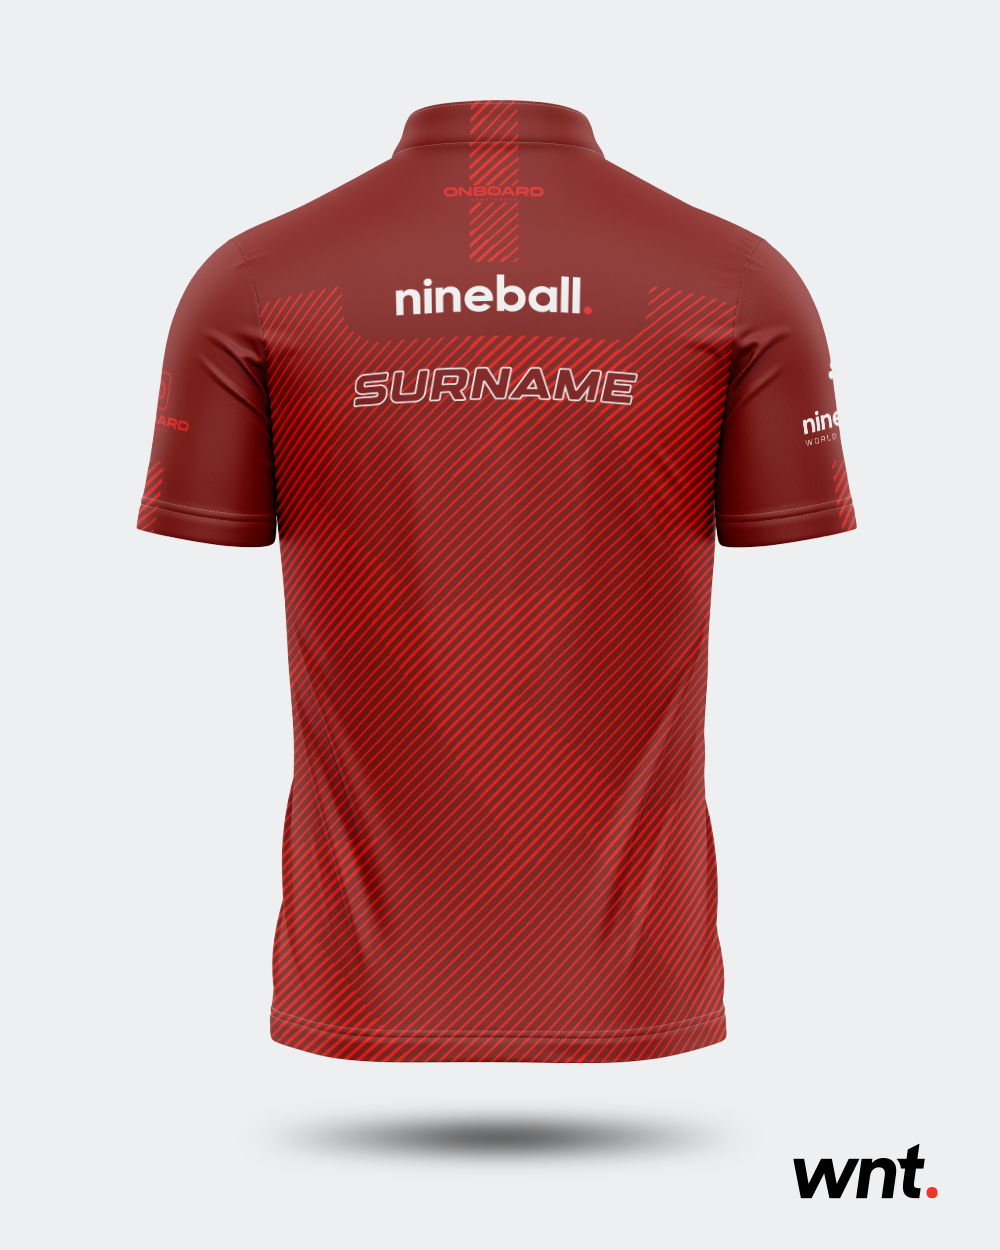 Essential Nineball Jersey - Red